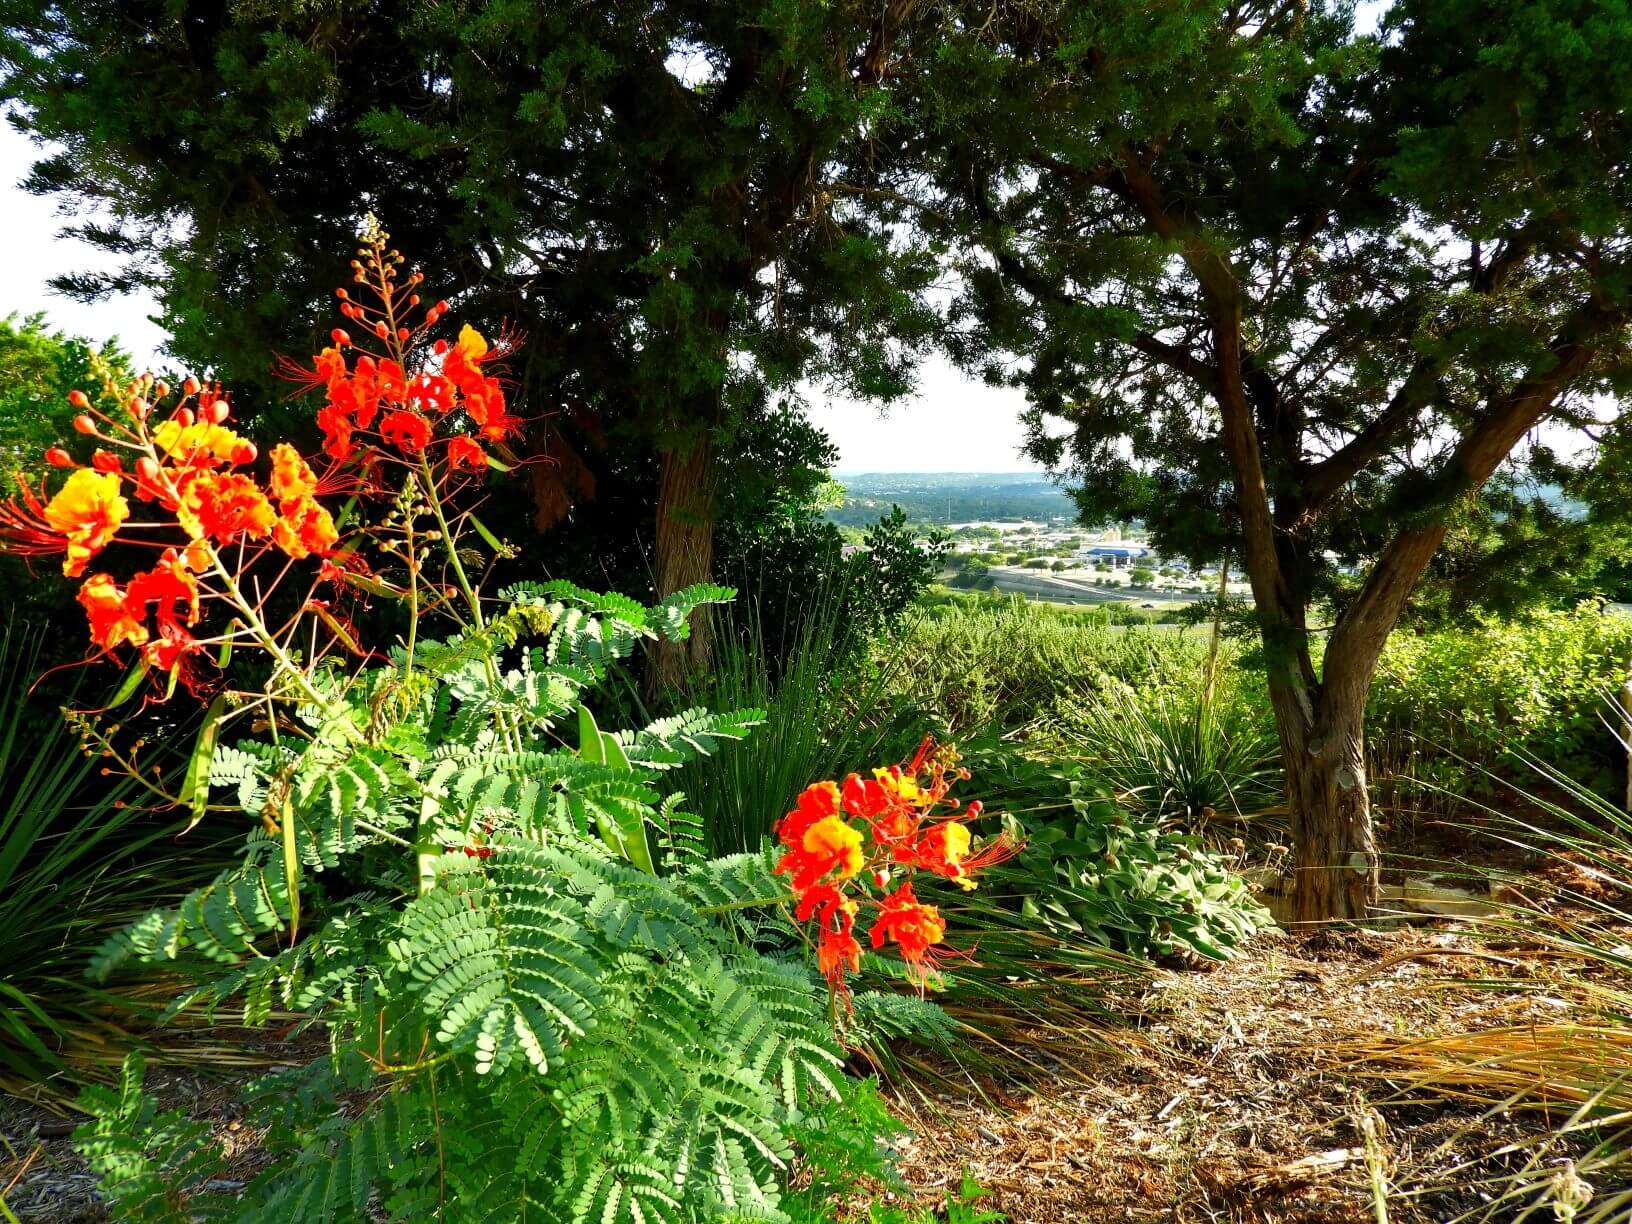 bright, red flowers on fern-like foliage with a town in the background